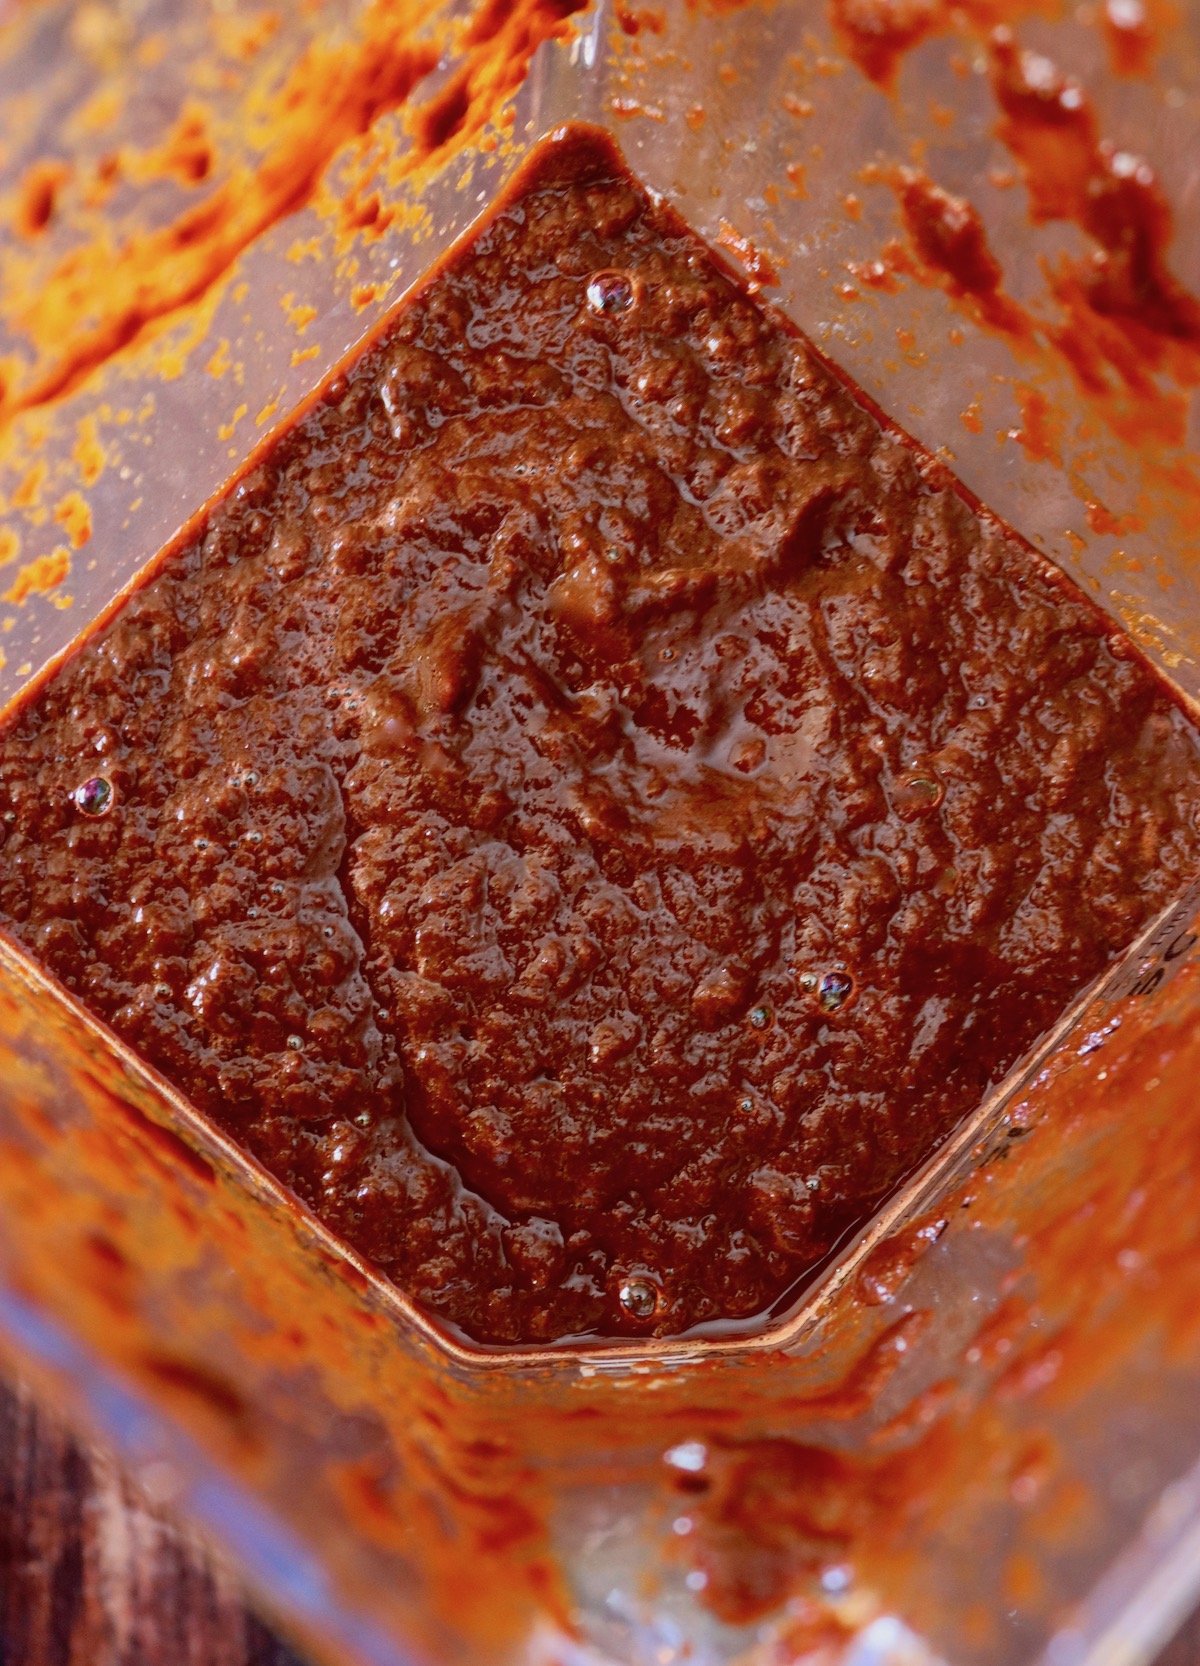 Top view of blender with ancho chile sauce blended.